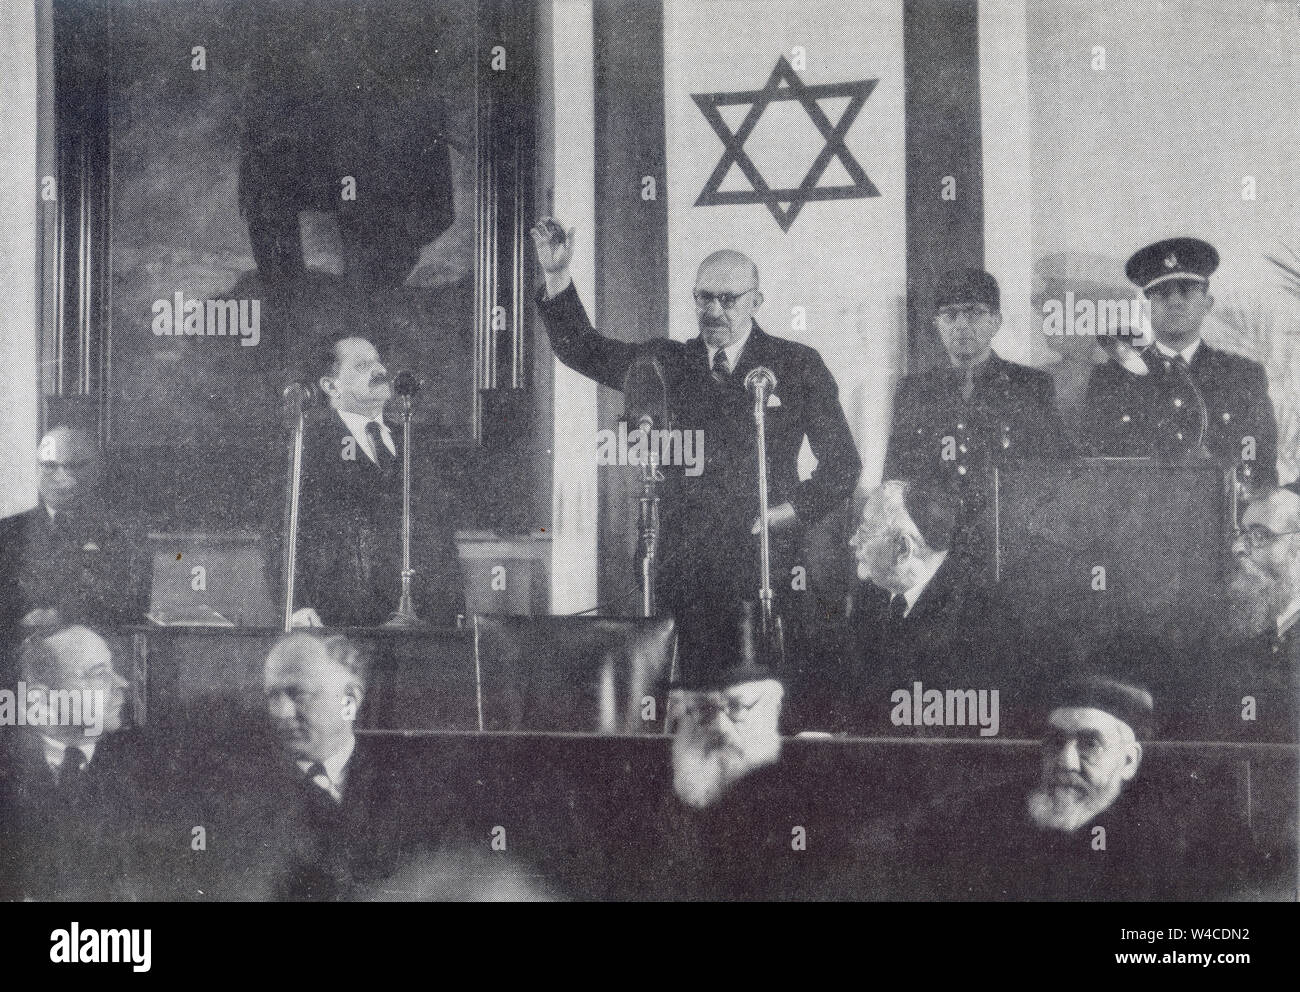 Dr. Chaim Weizmann Taking Oath of Office. Chaim Azriel Weizmann (27 November 1874 – 9 November 1952) was a Zionist leader and Israeli statesman who served as president of the Zionist Organization and later as the first president of Israel. He was elected on 16 February 1949, and served until his death in 1952. Stock Photo